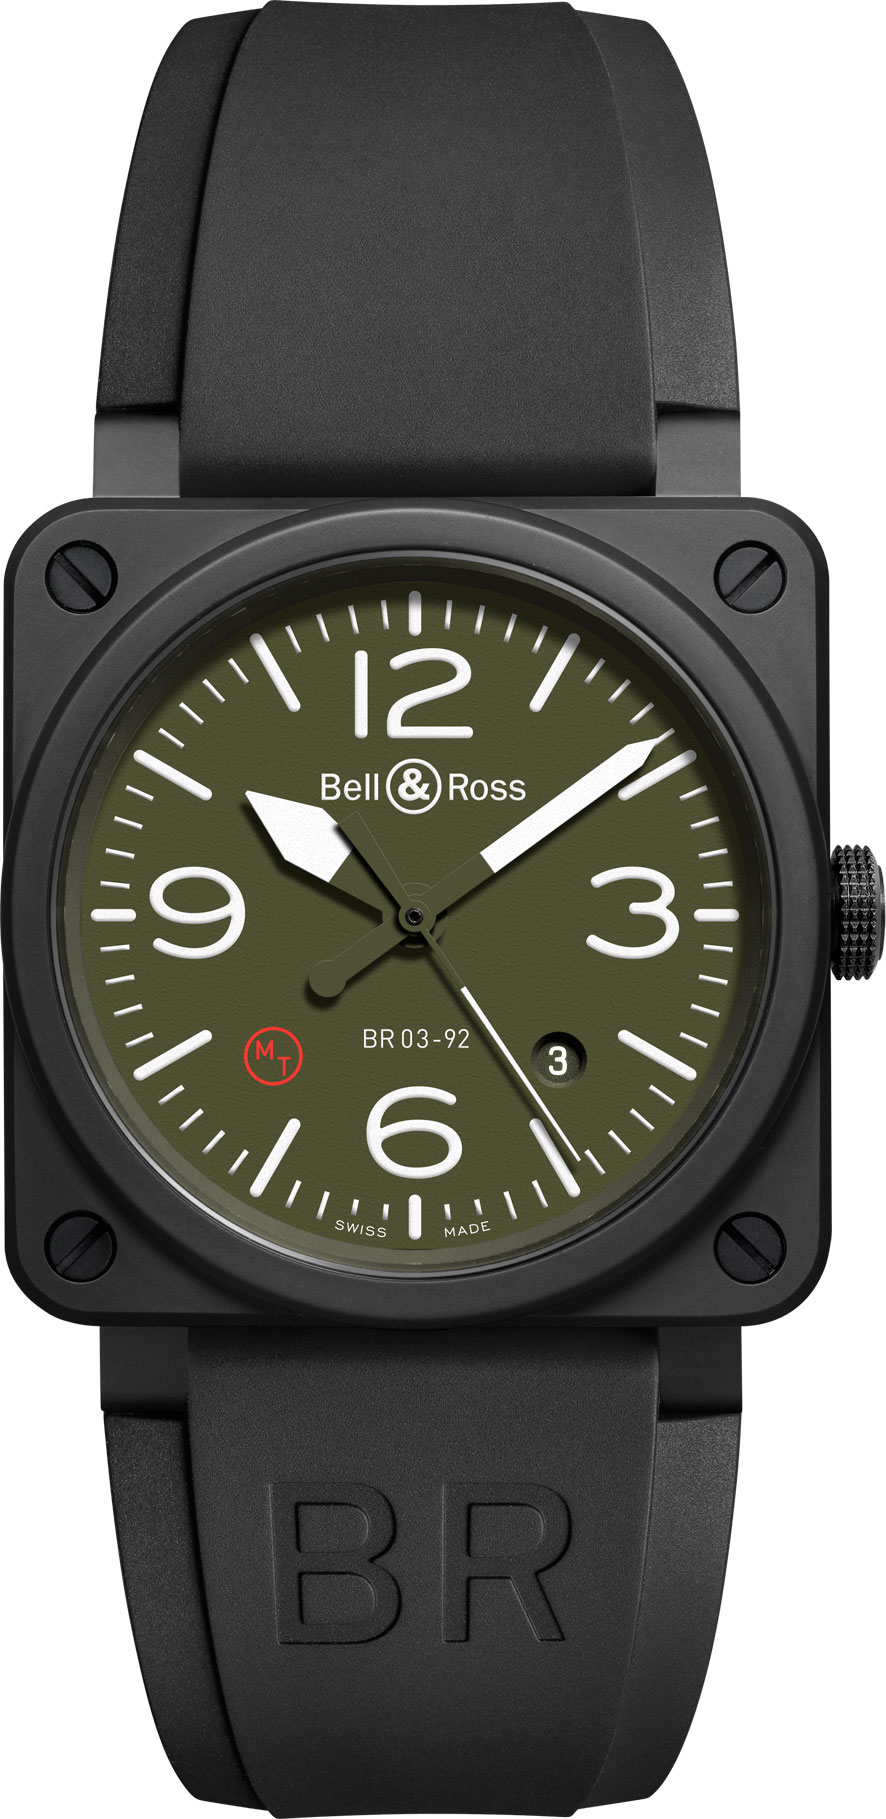 Bell and Ross BR03-92 Ceramic Military Type caucho